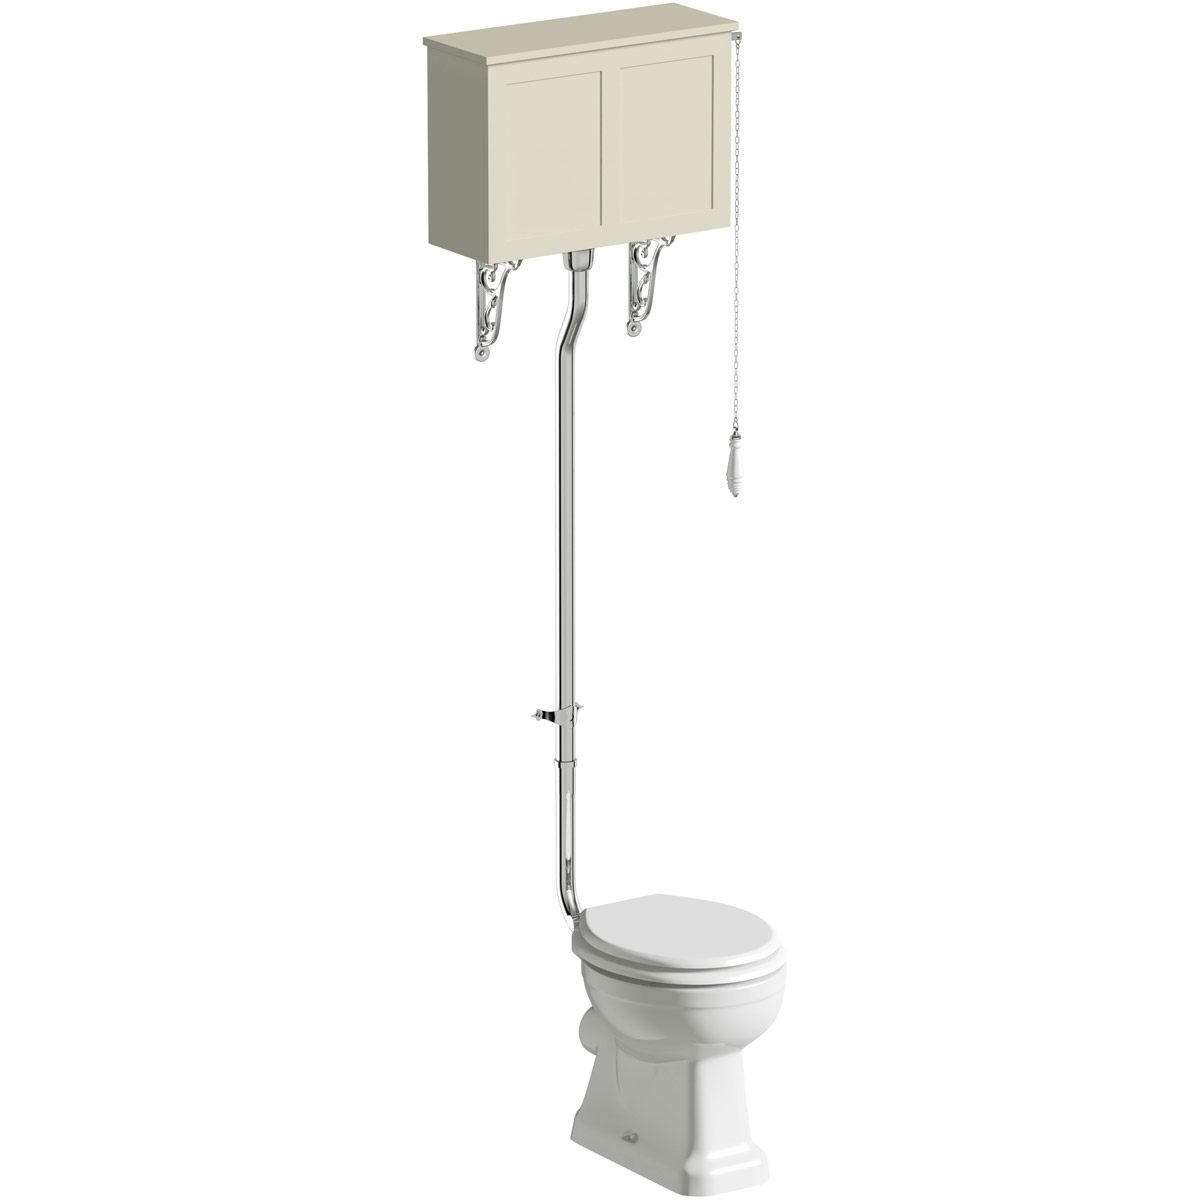 The Bath Co. Camberley high level toilet with satin ivory toilet box and seat